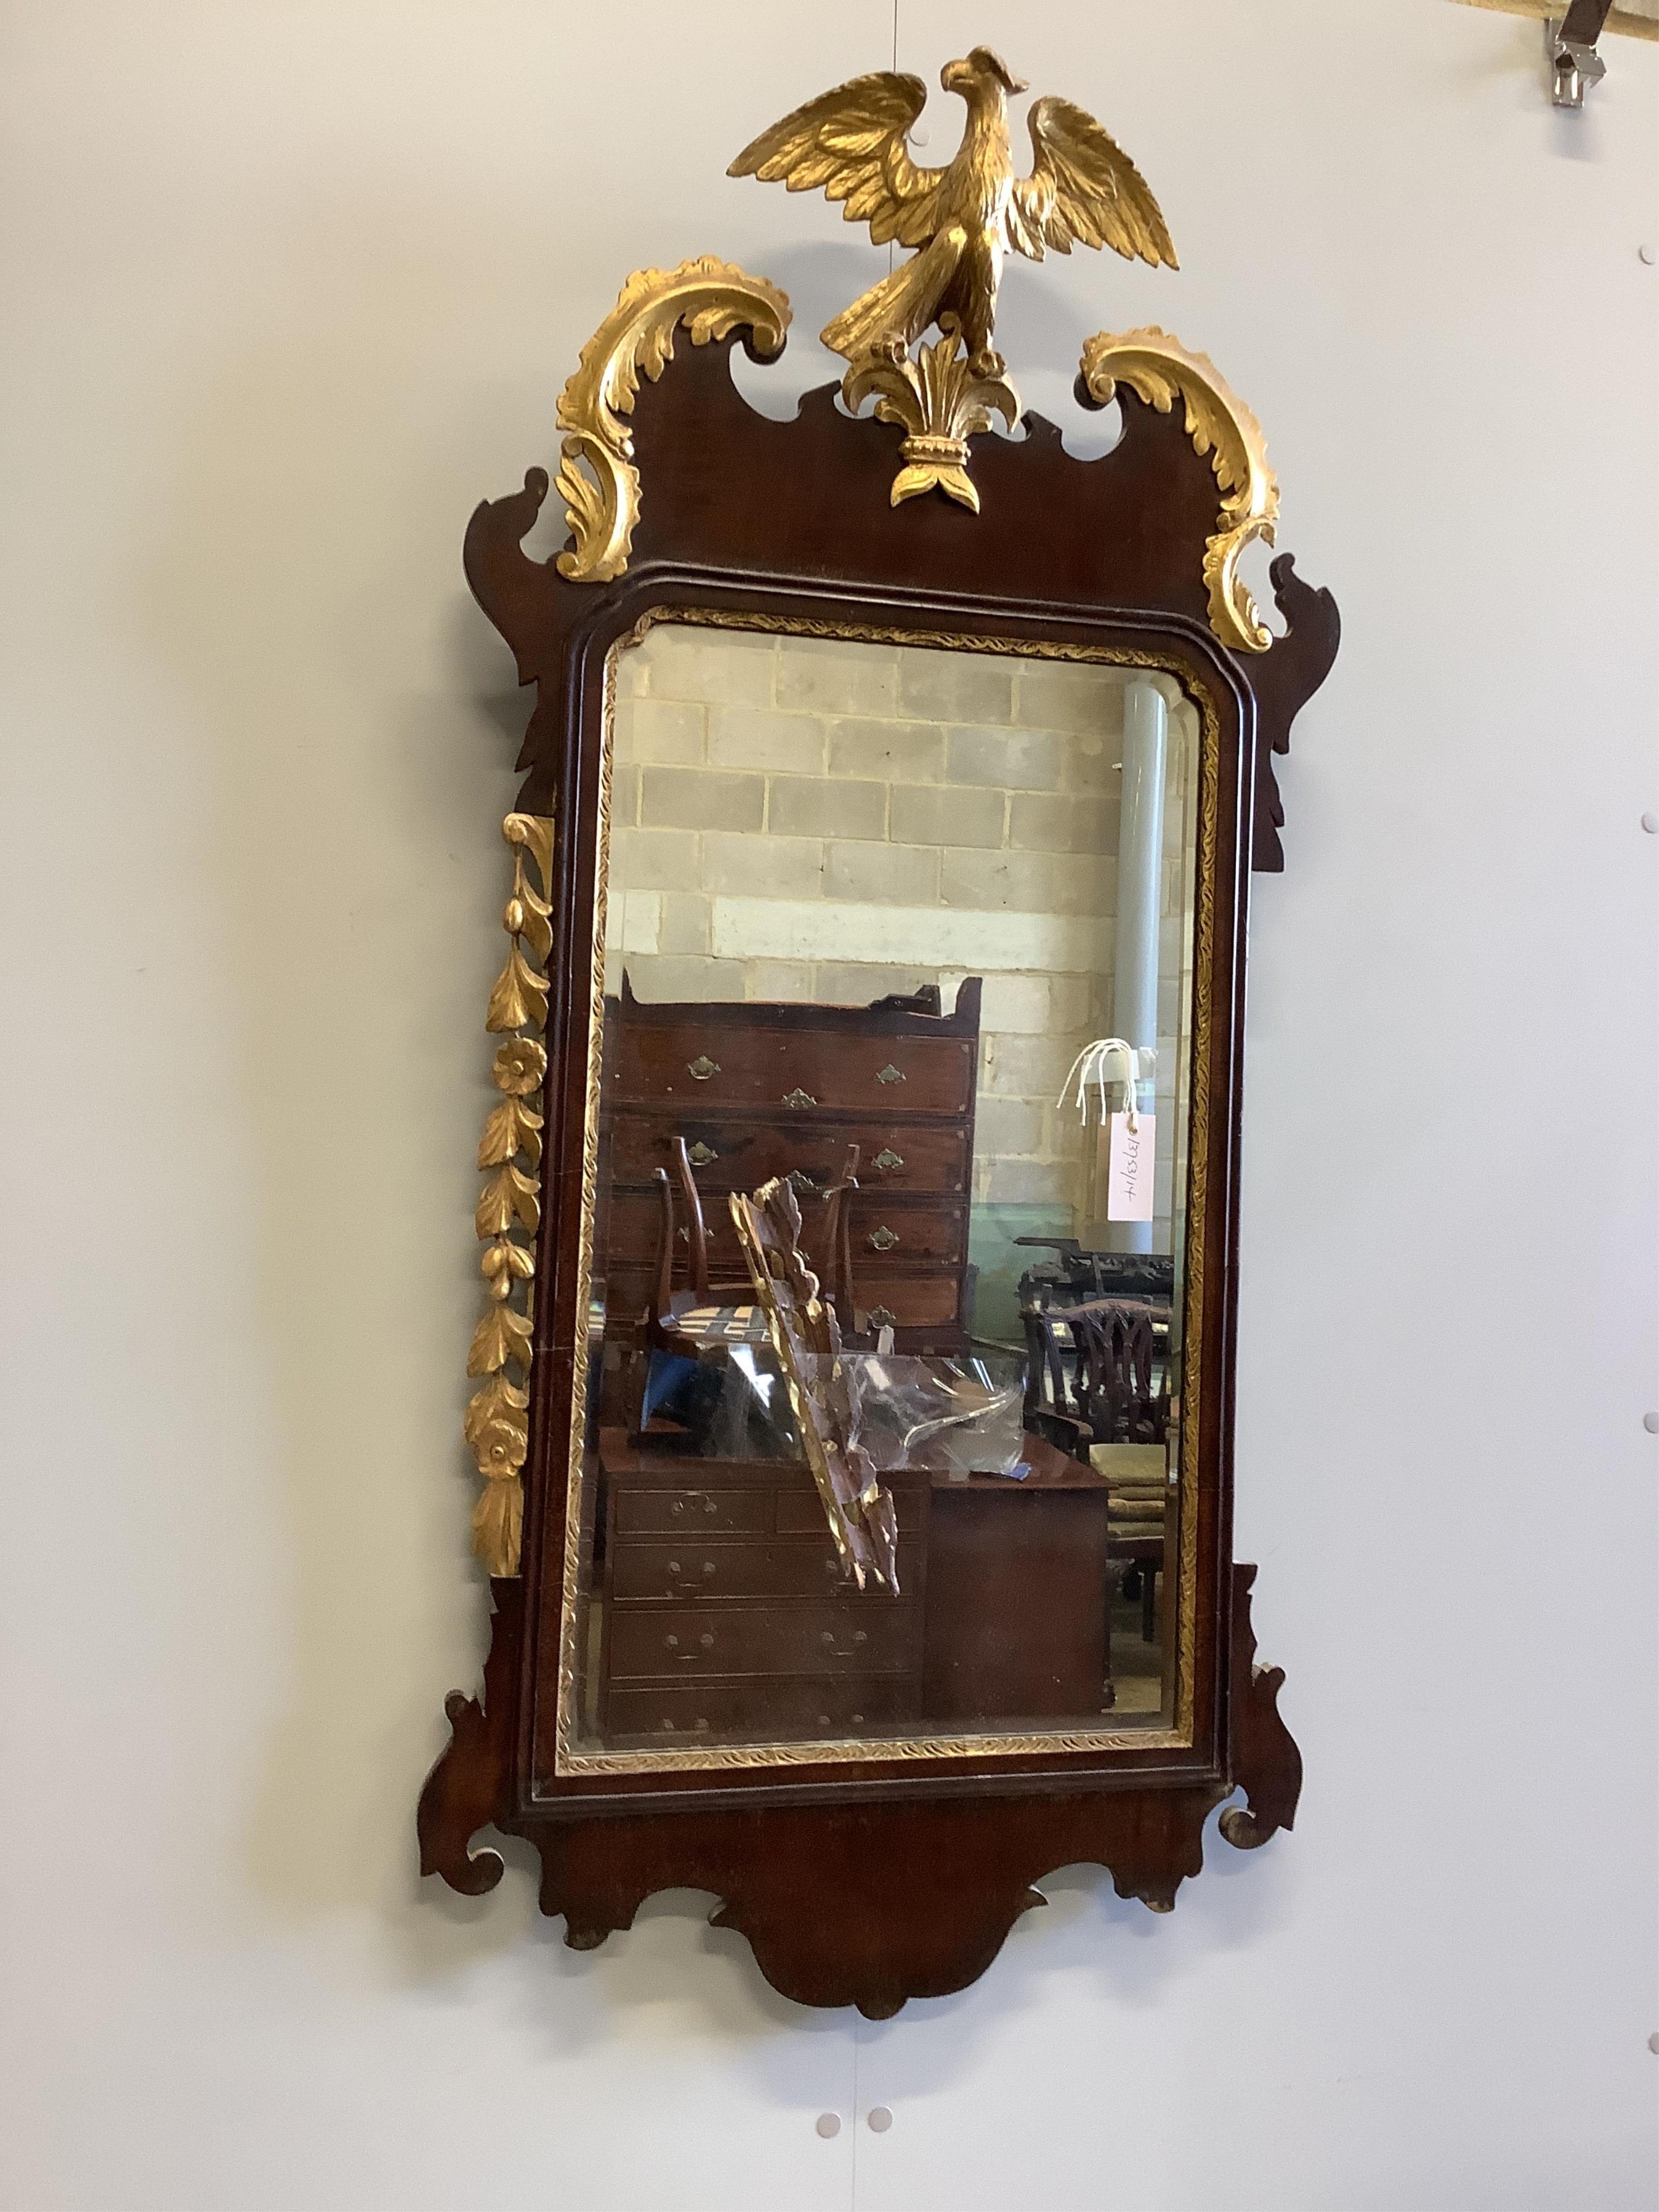 An early 19th century Chippendale design mahogany and parcel gilt fret carved pier glass, having carved eagle surmount between twin scrolled pediment and with foliage carved mount, width 57cm, height 120cm. Condition - p